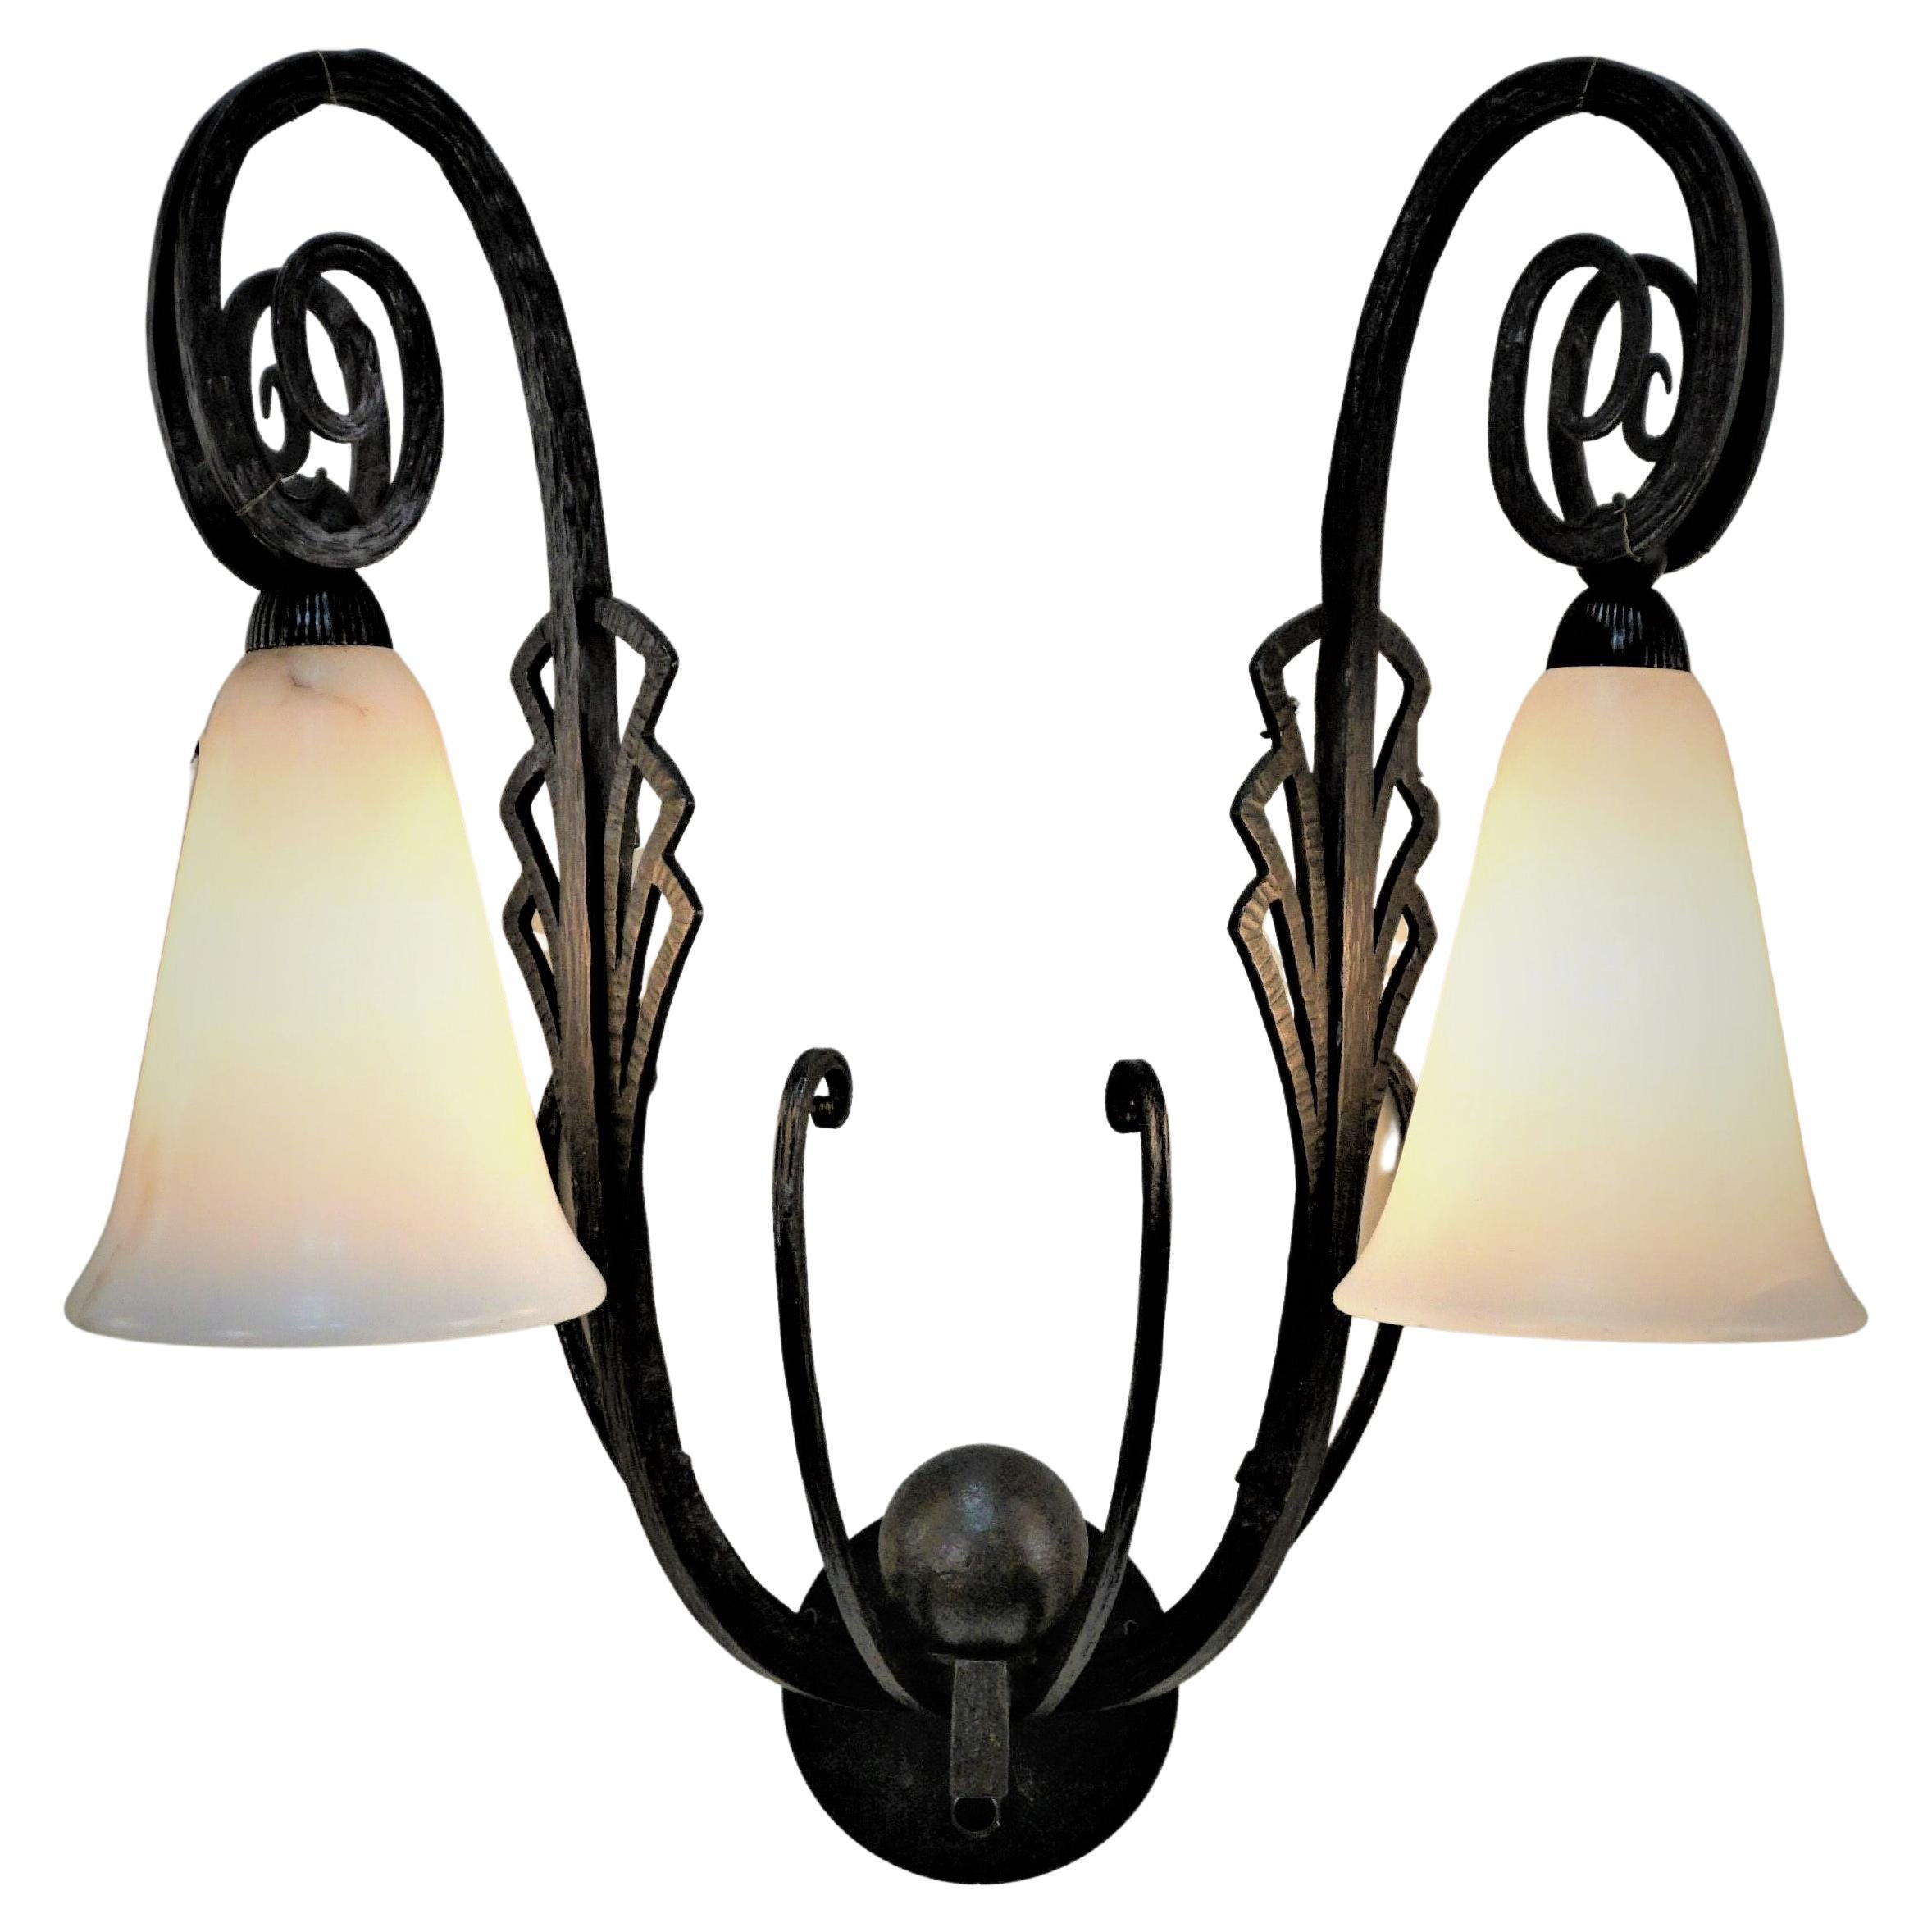 Edgar Bandt Wrought Iron Wall Sconce